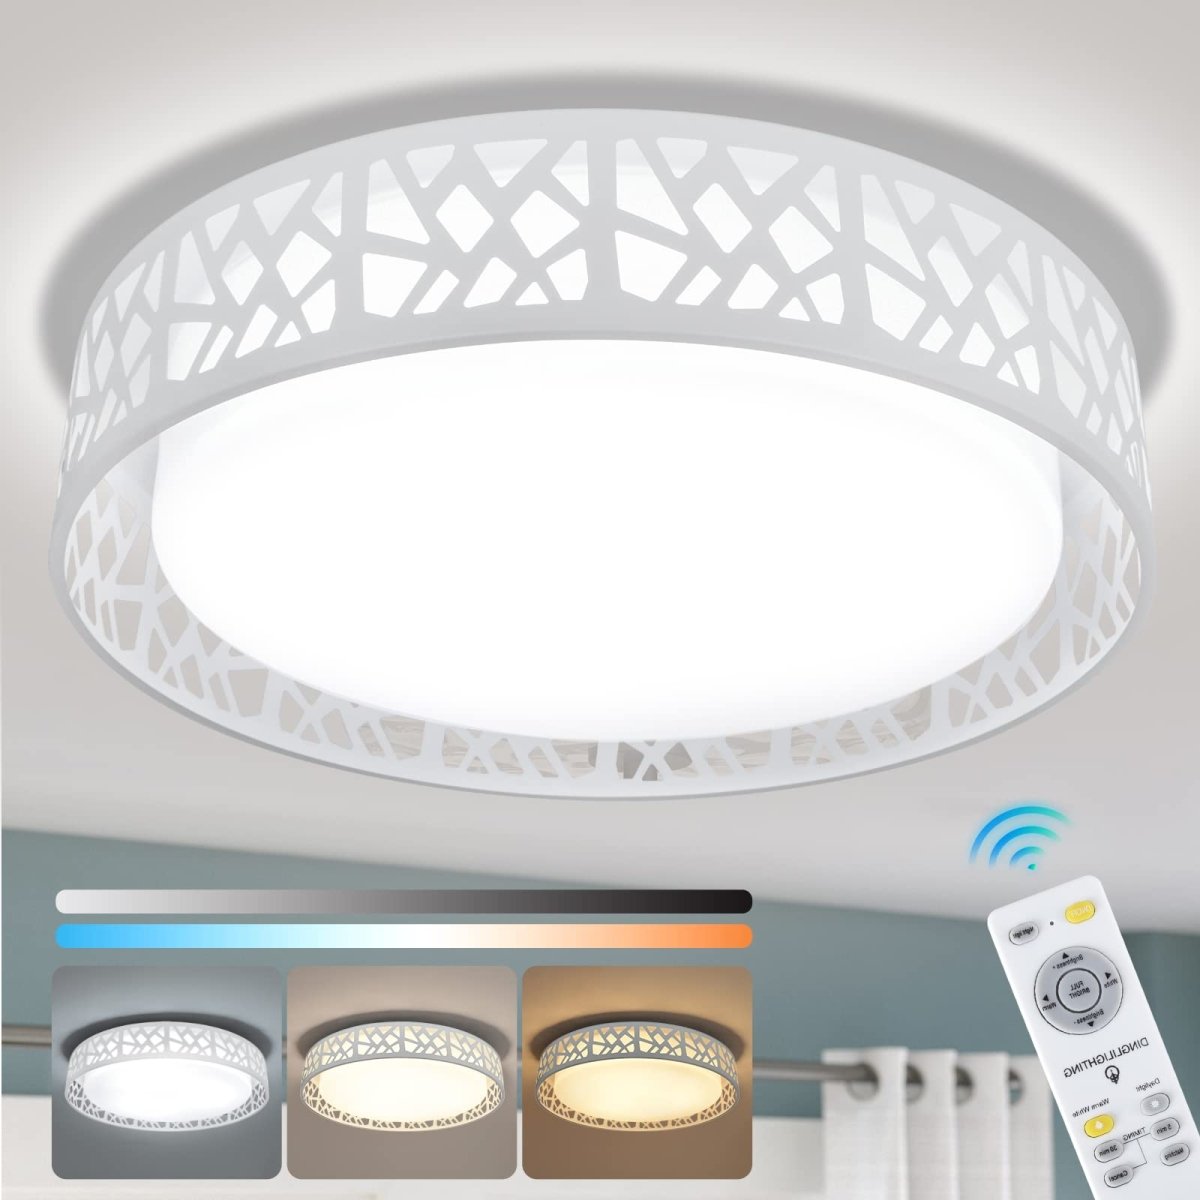 DLLT 35W LED Ceiling Light Dimmable Modern White Ceiling Light Living Room with Remote Control and Round Large Design with Drawing (3000 K - 6000 K) for Bedroom Kitchen Dining Room Office Hall Children's Room - WSCL38-35C-W 2 | DEPULEY